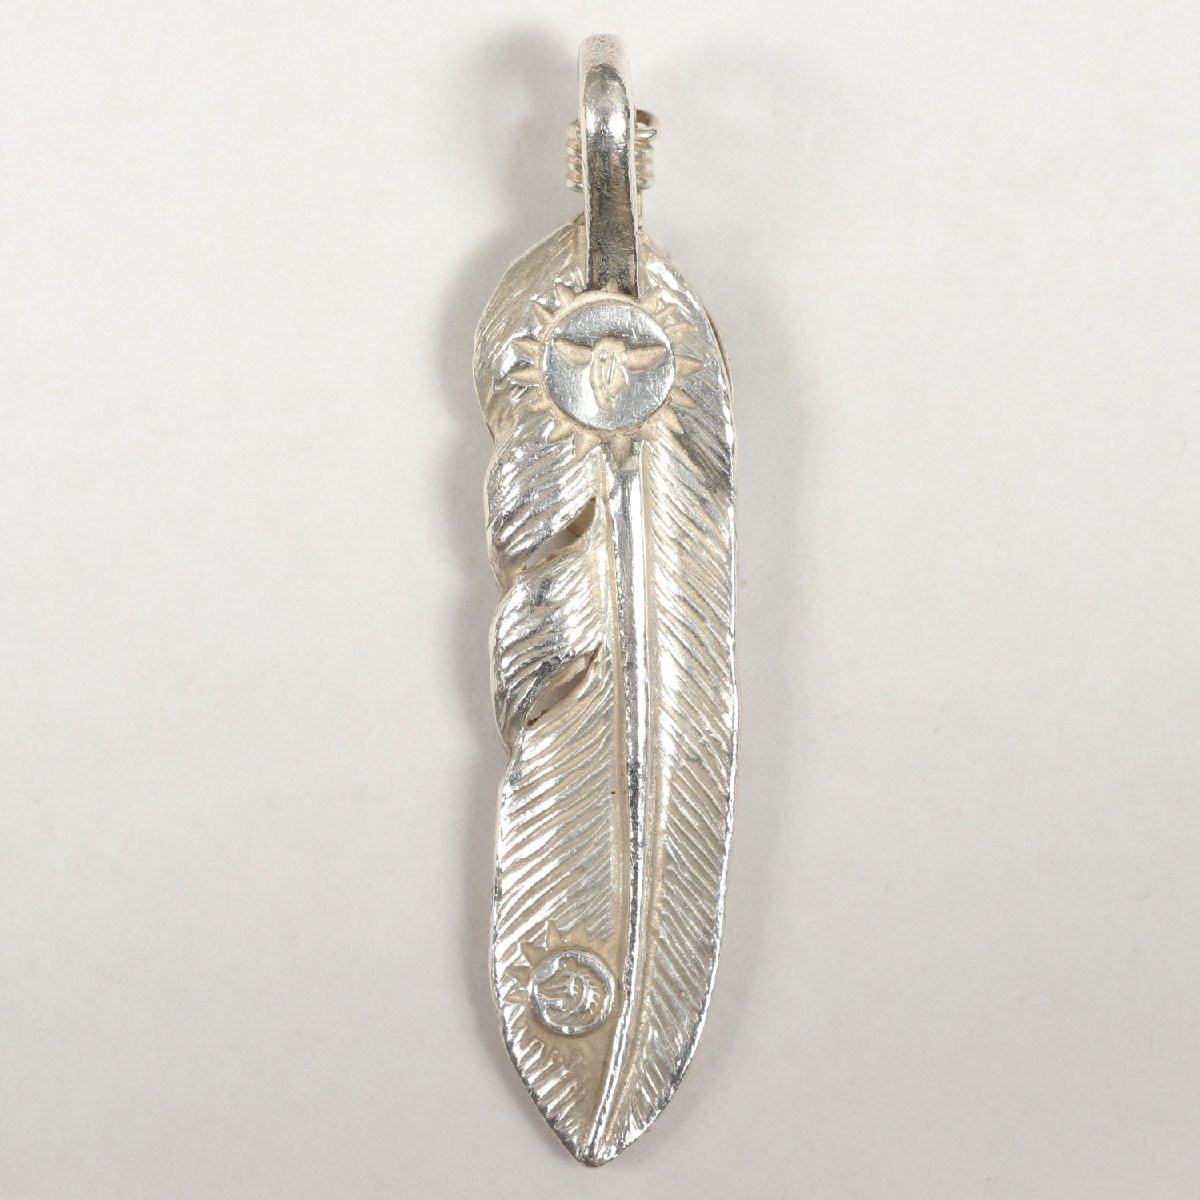 TADY&KINGtati-& King on silver Heart silver feather silver 925 S( right direction ) pendant top accessory jewelry brand 